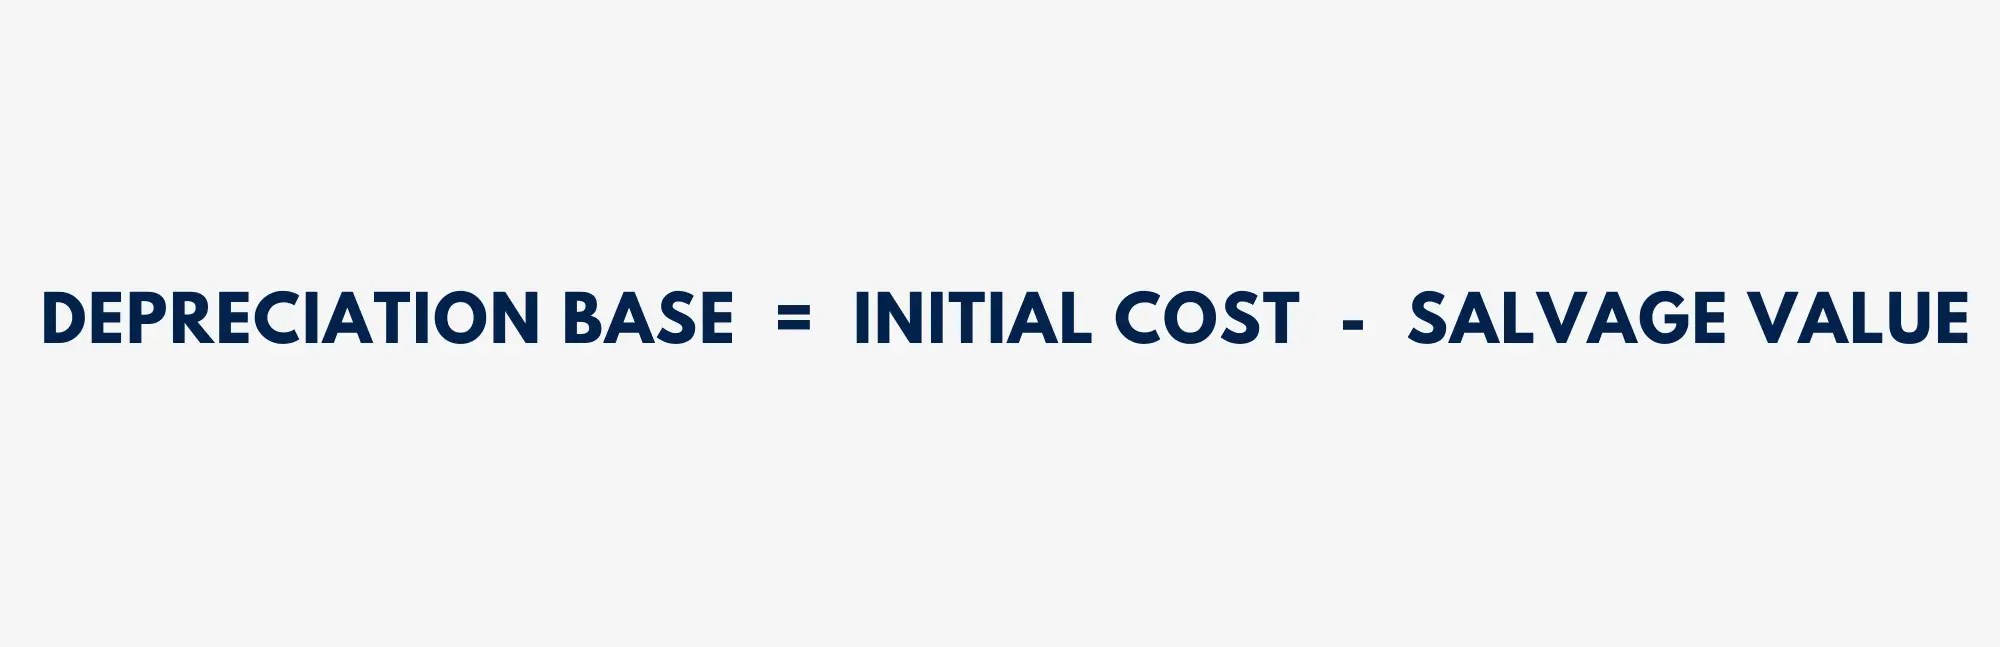 Depreciation base of asset = Initial Cost - Salvage Value